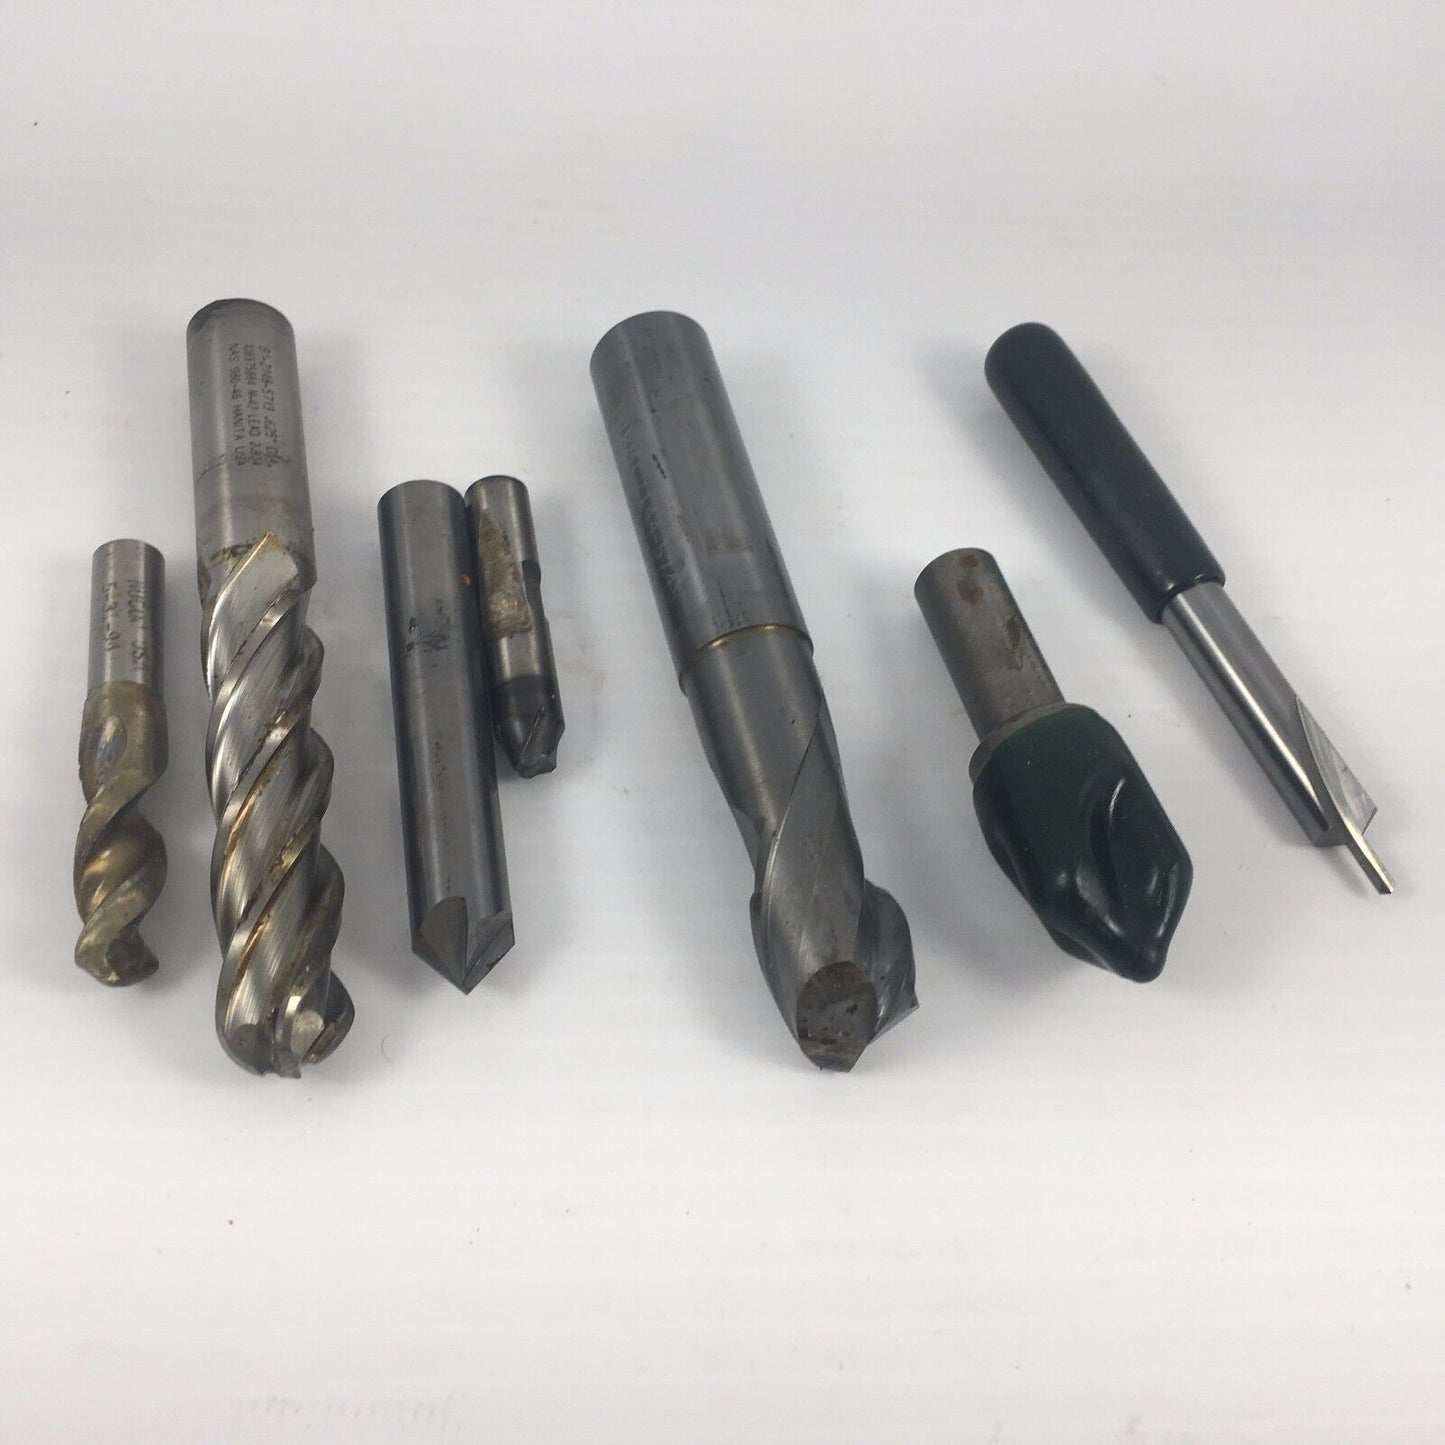 Lot of 7 HSS End Mill Drills Hanita, Helical, Jarvis 3/8"- 3/4"